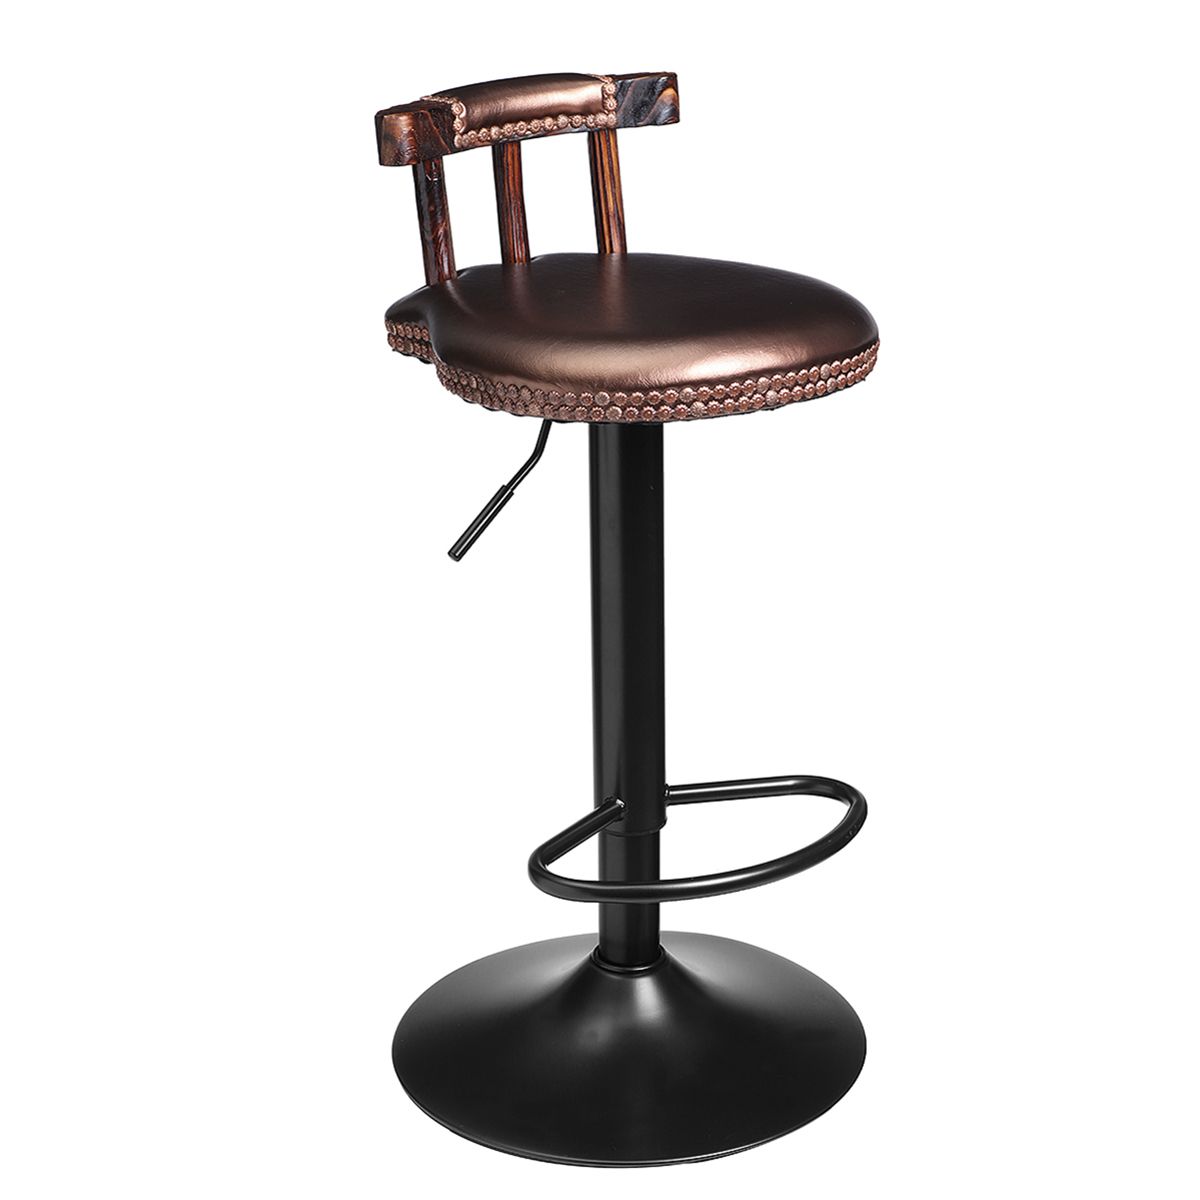 Vintage-Leather-Breakfast-Bar-Stool-Turning-Barstools-Footrest-Kitchen-Chair-Bar-Decorations-1333963